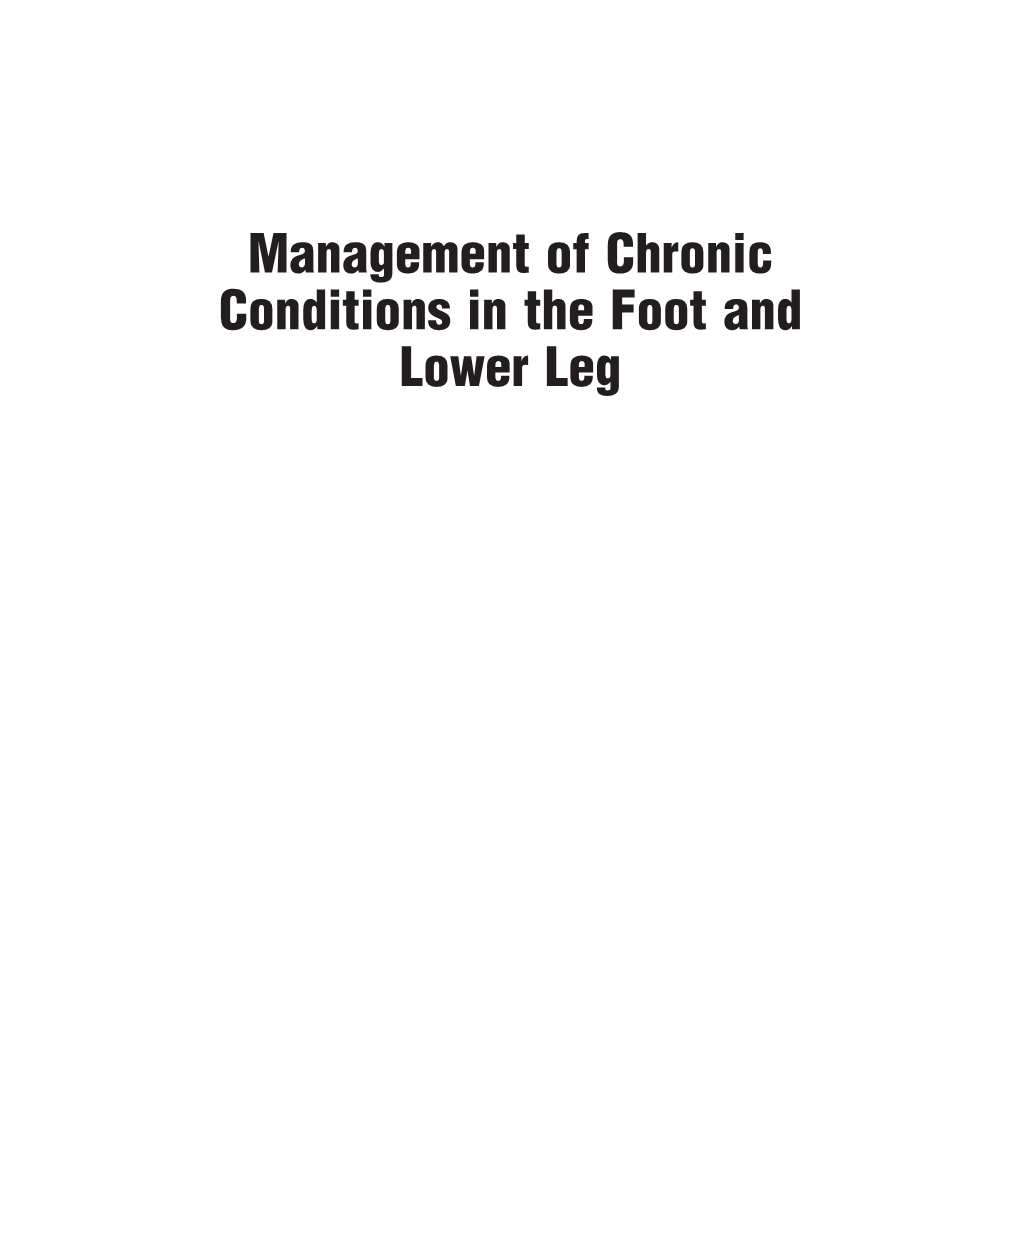 Management of Chronic Conditions in the Foot and Lower